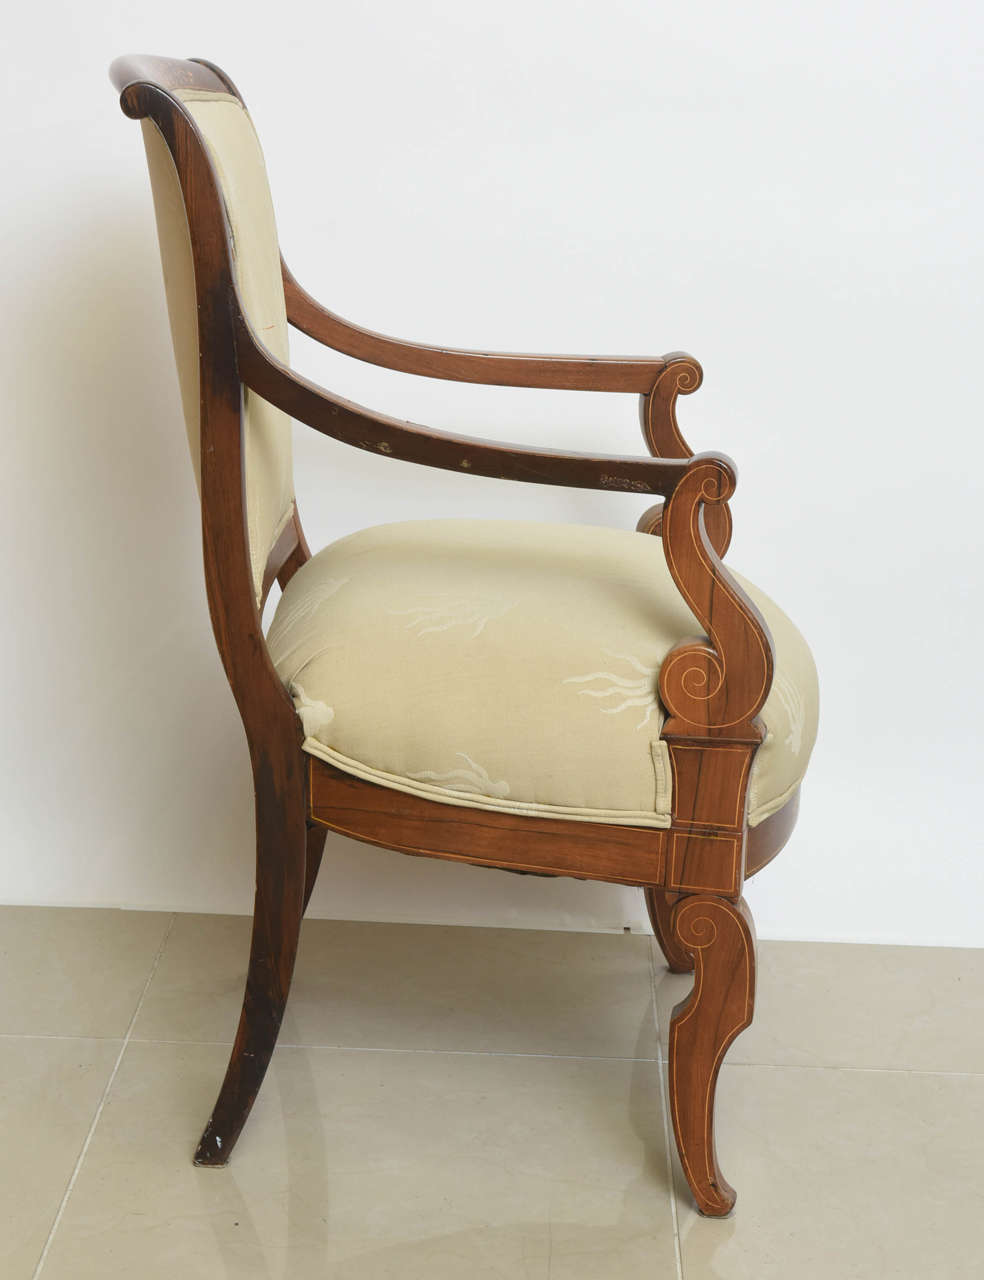 Early 19th Century Charles X Inlaid Mahogany and Walnut Open Armchair, France For Sale